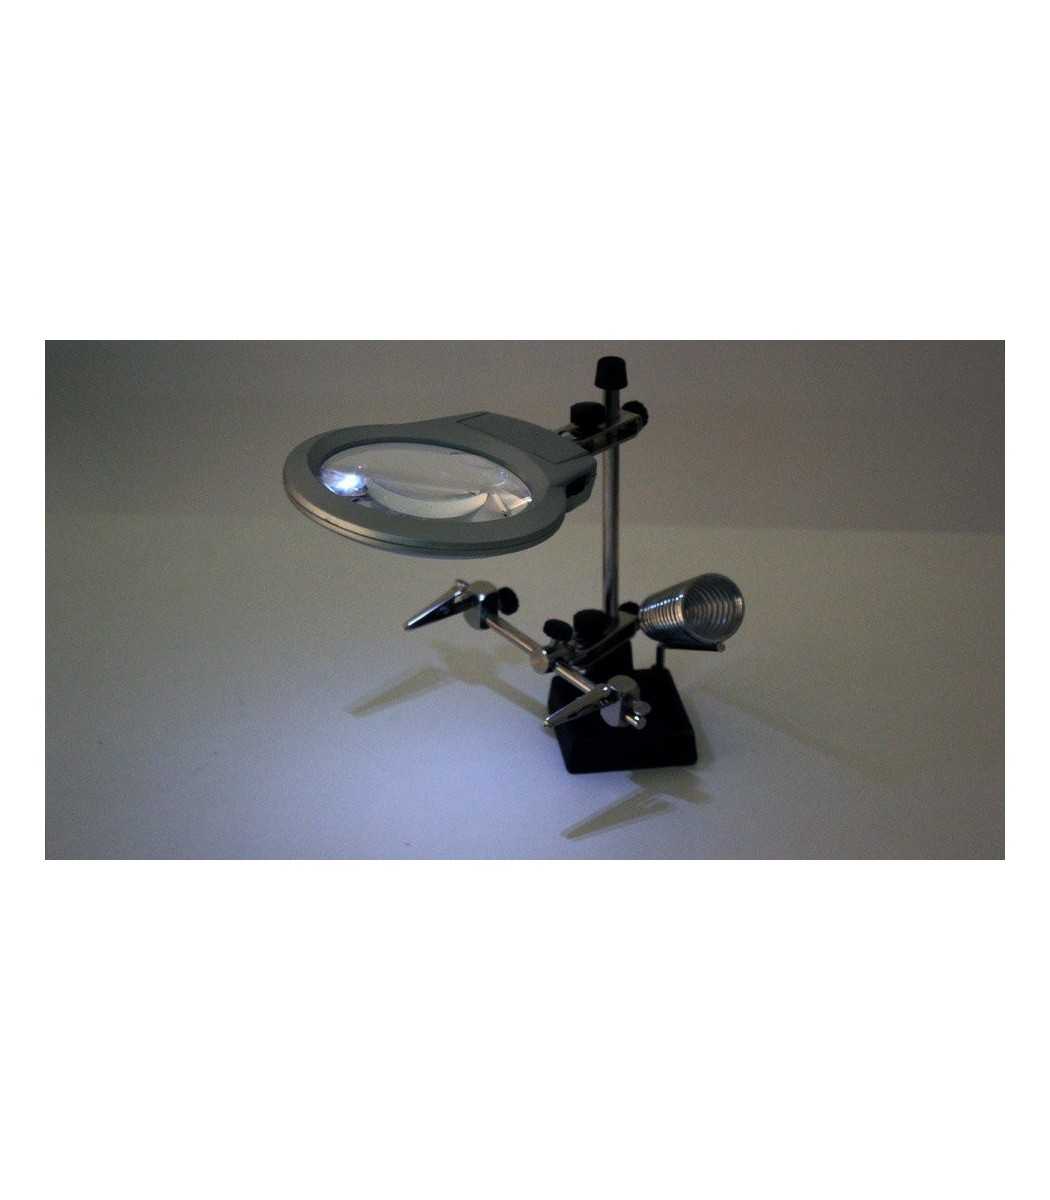 Welding Magnifying Glasses 5 LED Lights 2.5X 7.5X 10X Lens Auxiliary Clips Magnifier